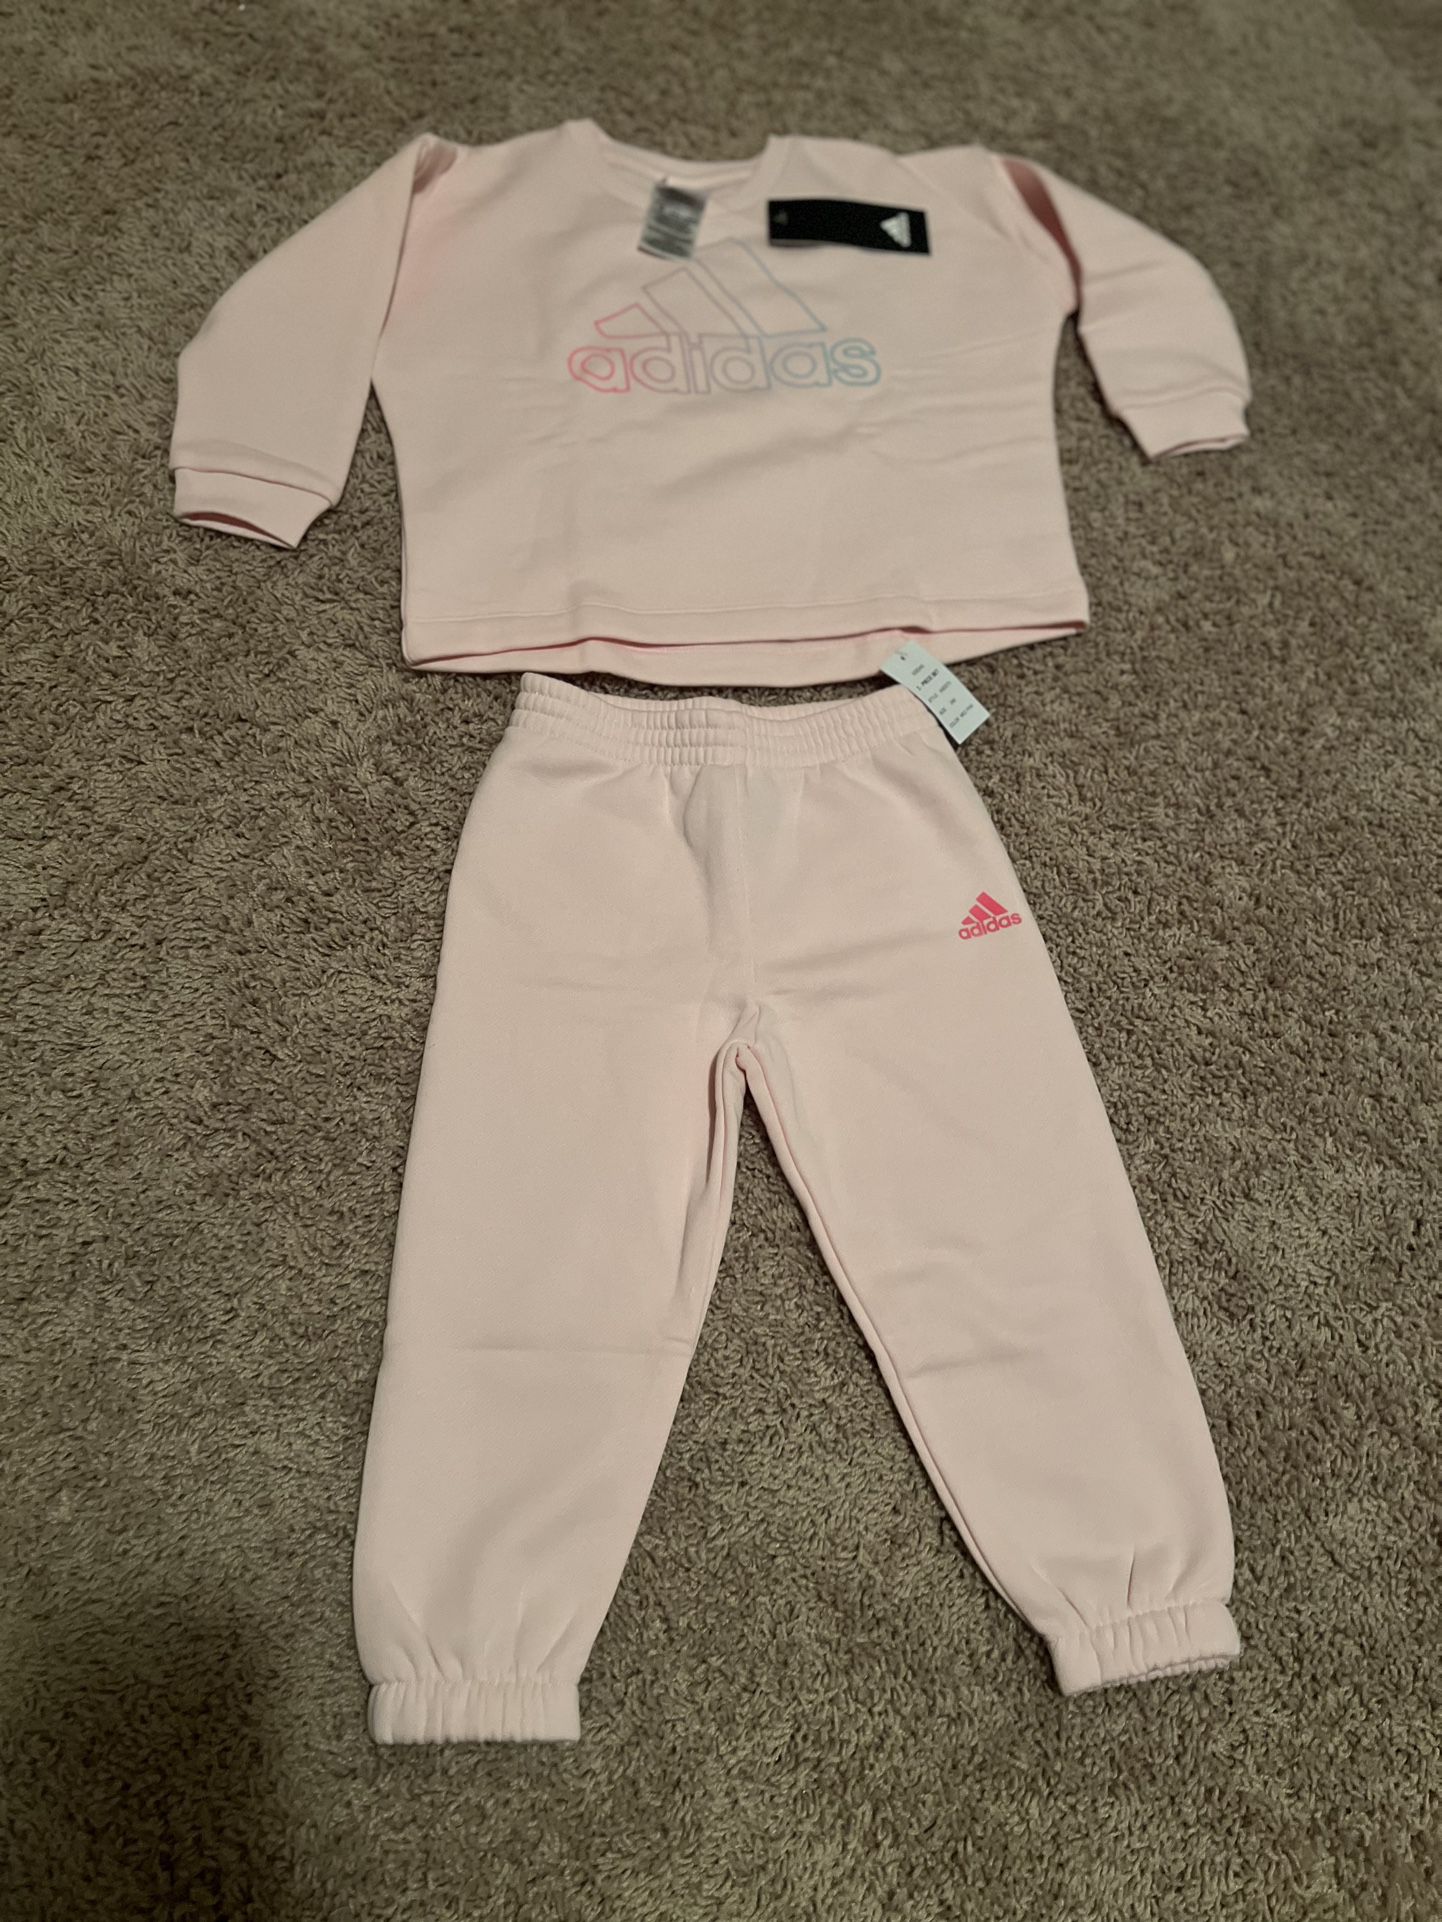 Adidas toddler outfit 